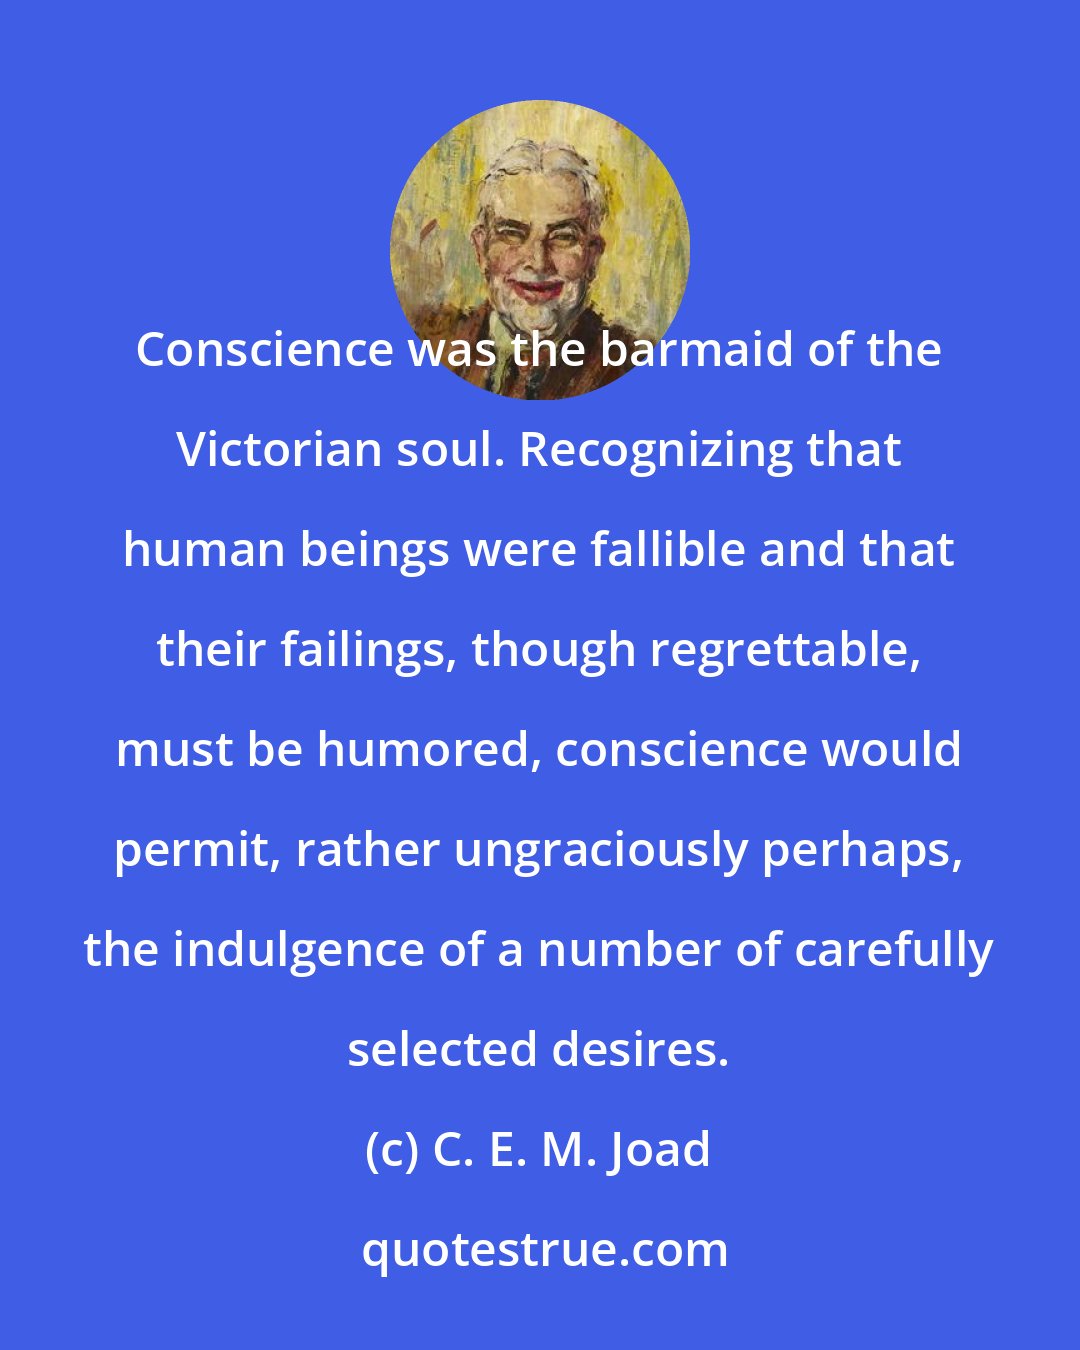 C. E. M. Joad: Conscience was the barmaid of the Victorian soul. Recognizing that human beings were fallible and that their failings, though regrettable, must be humored, conscience would permit, rather ungraciously perhaps, the indulgence of a number of carefully selected desires.